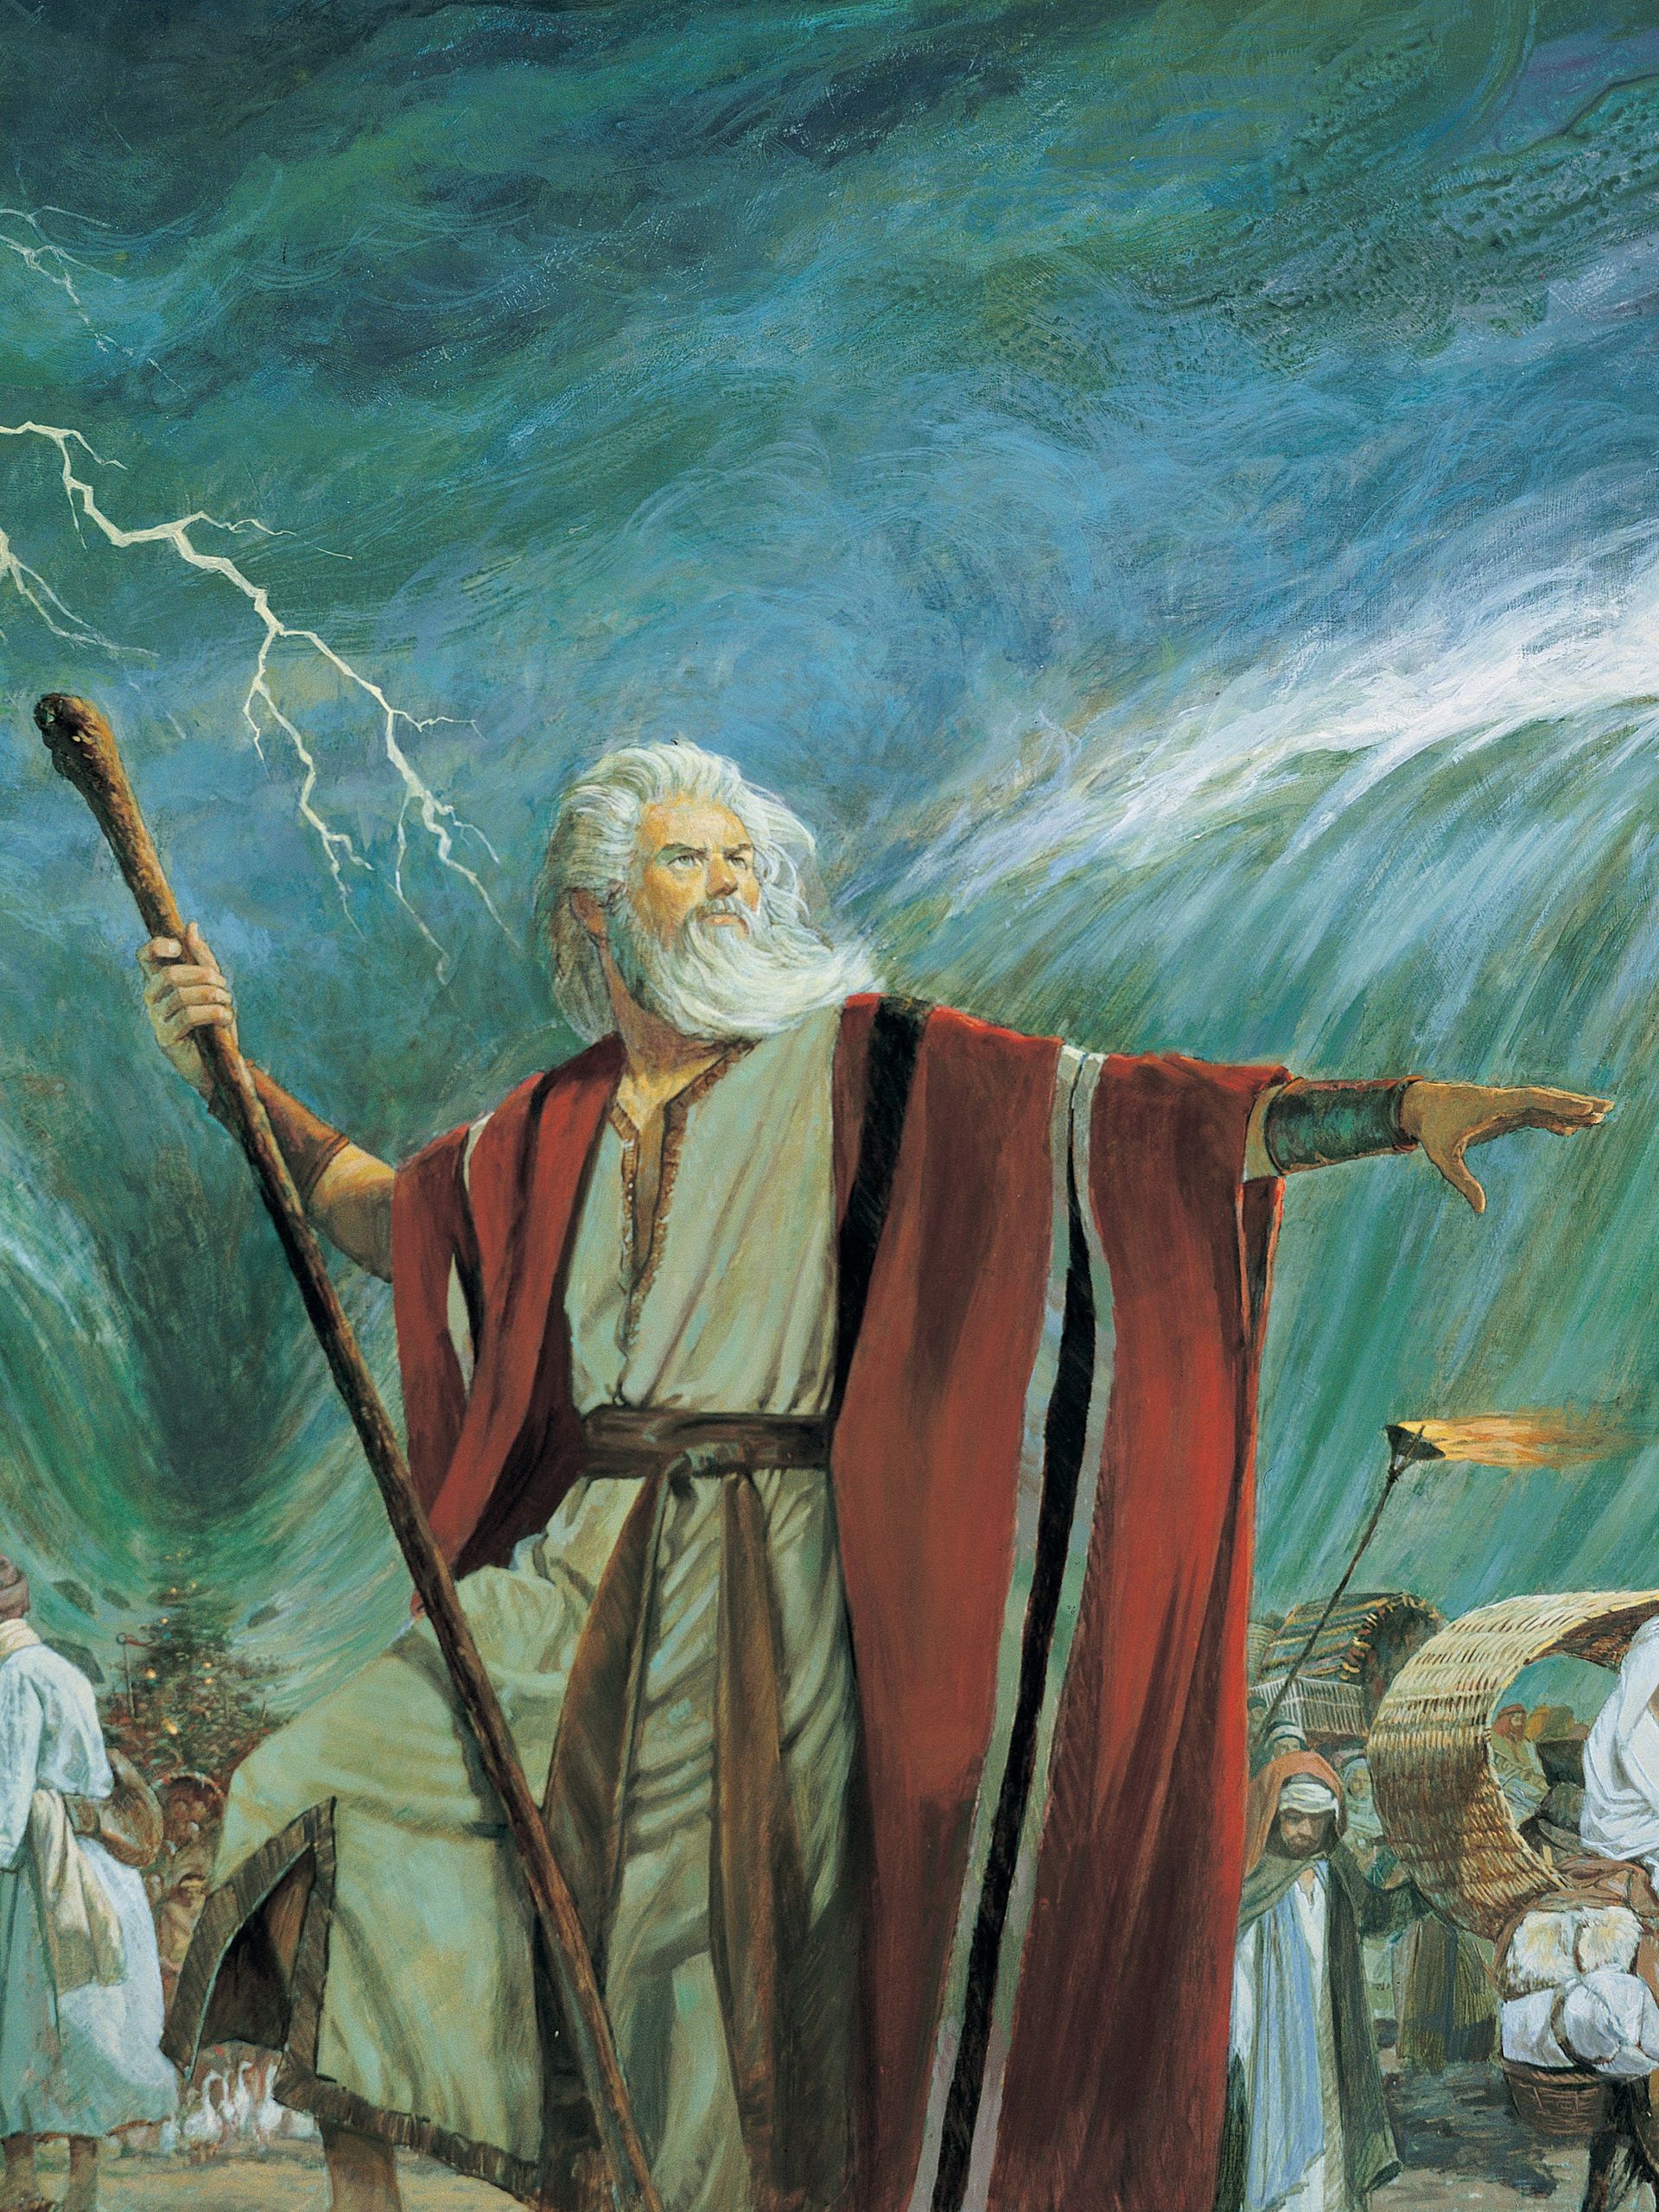 Painting of the the prophet Moses leading his people through the parted Red Sea.